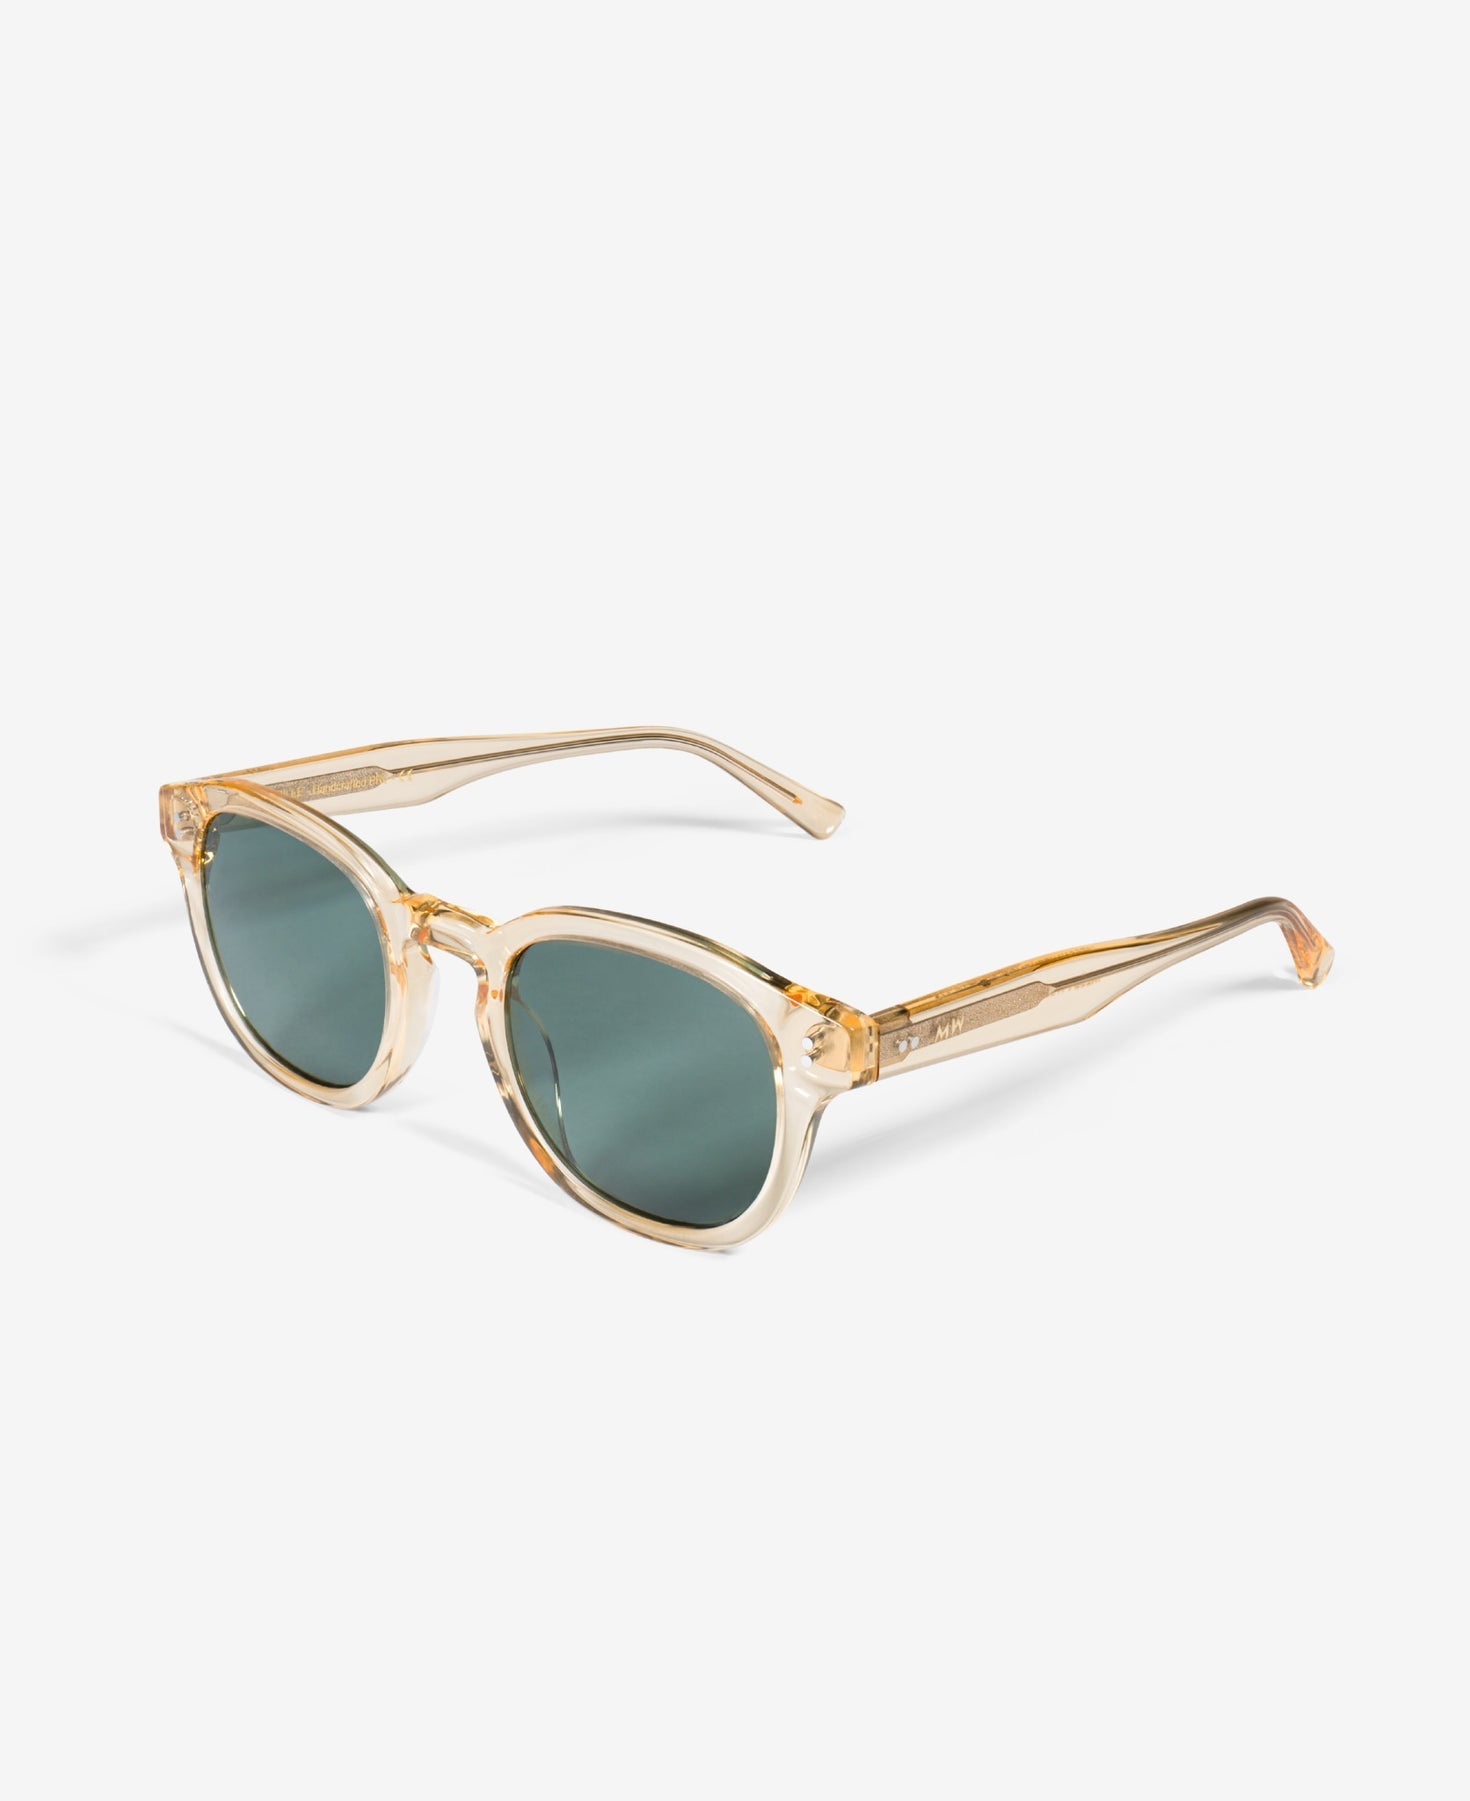 Messy Weekend Bille Sunglasses - Champagne Green